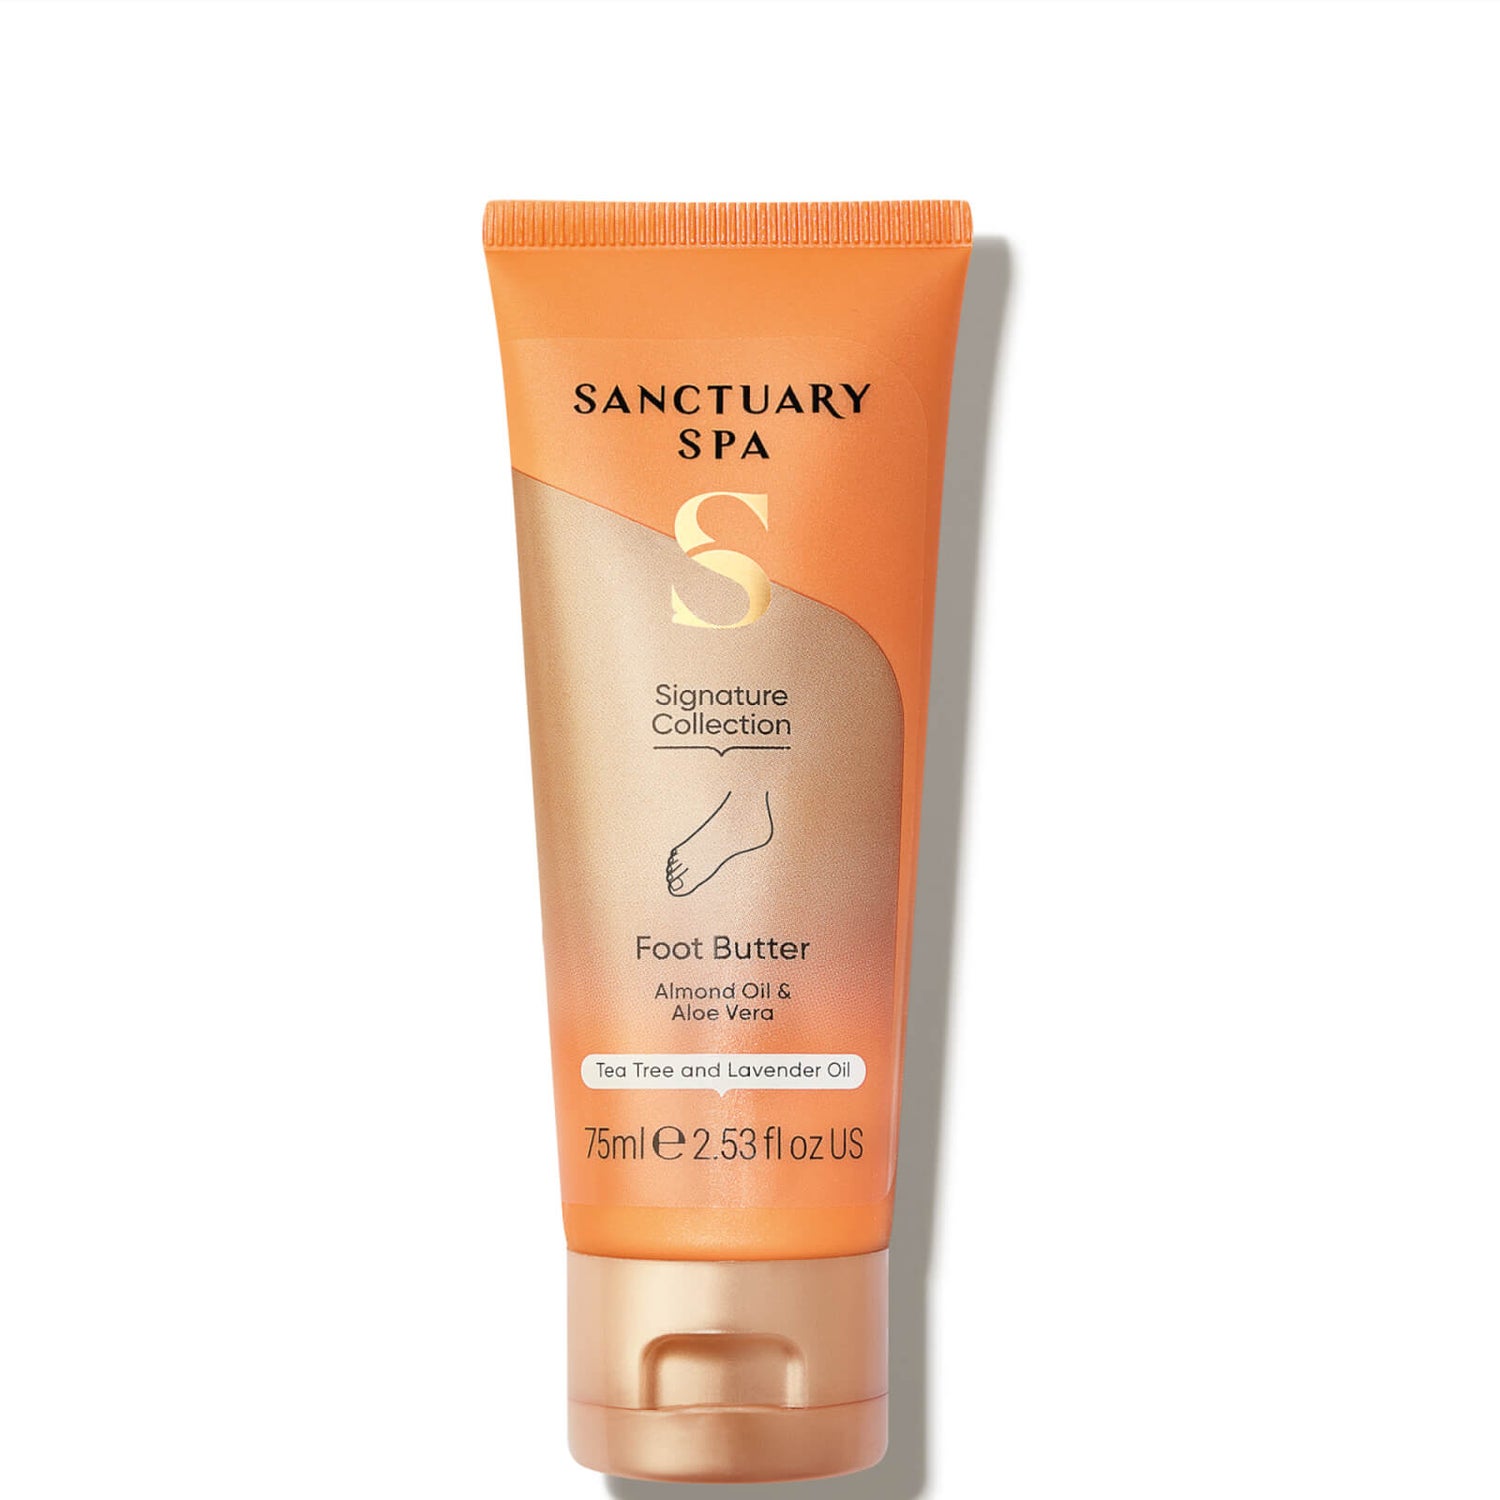 Sanctuary Spa Signature Collection Foot Butter 75ml